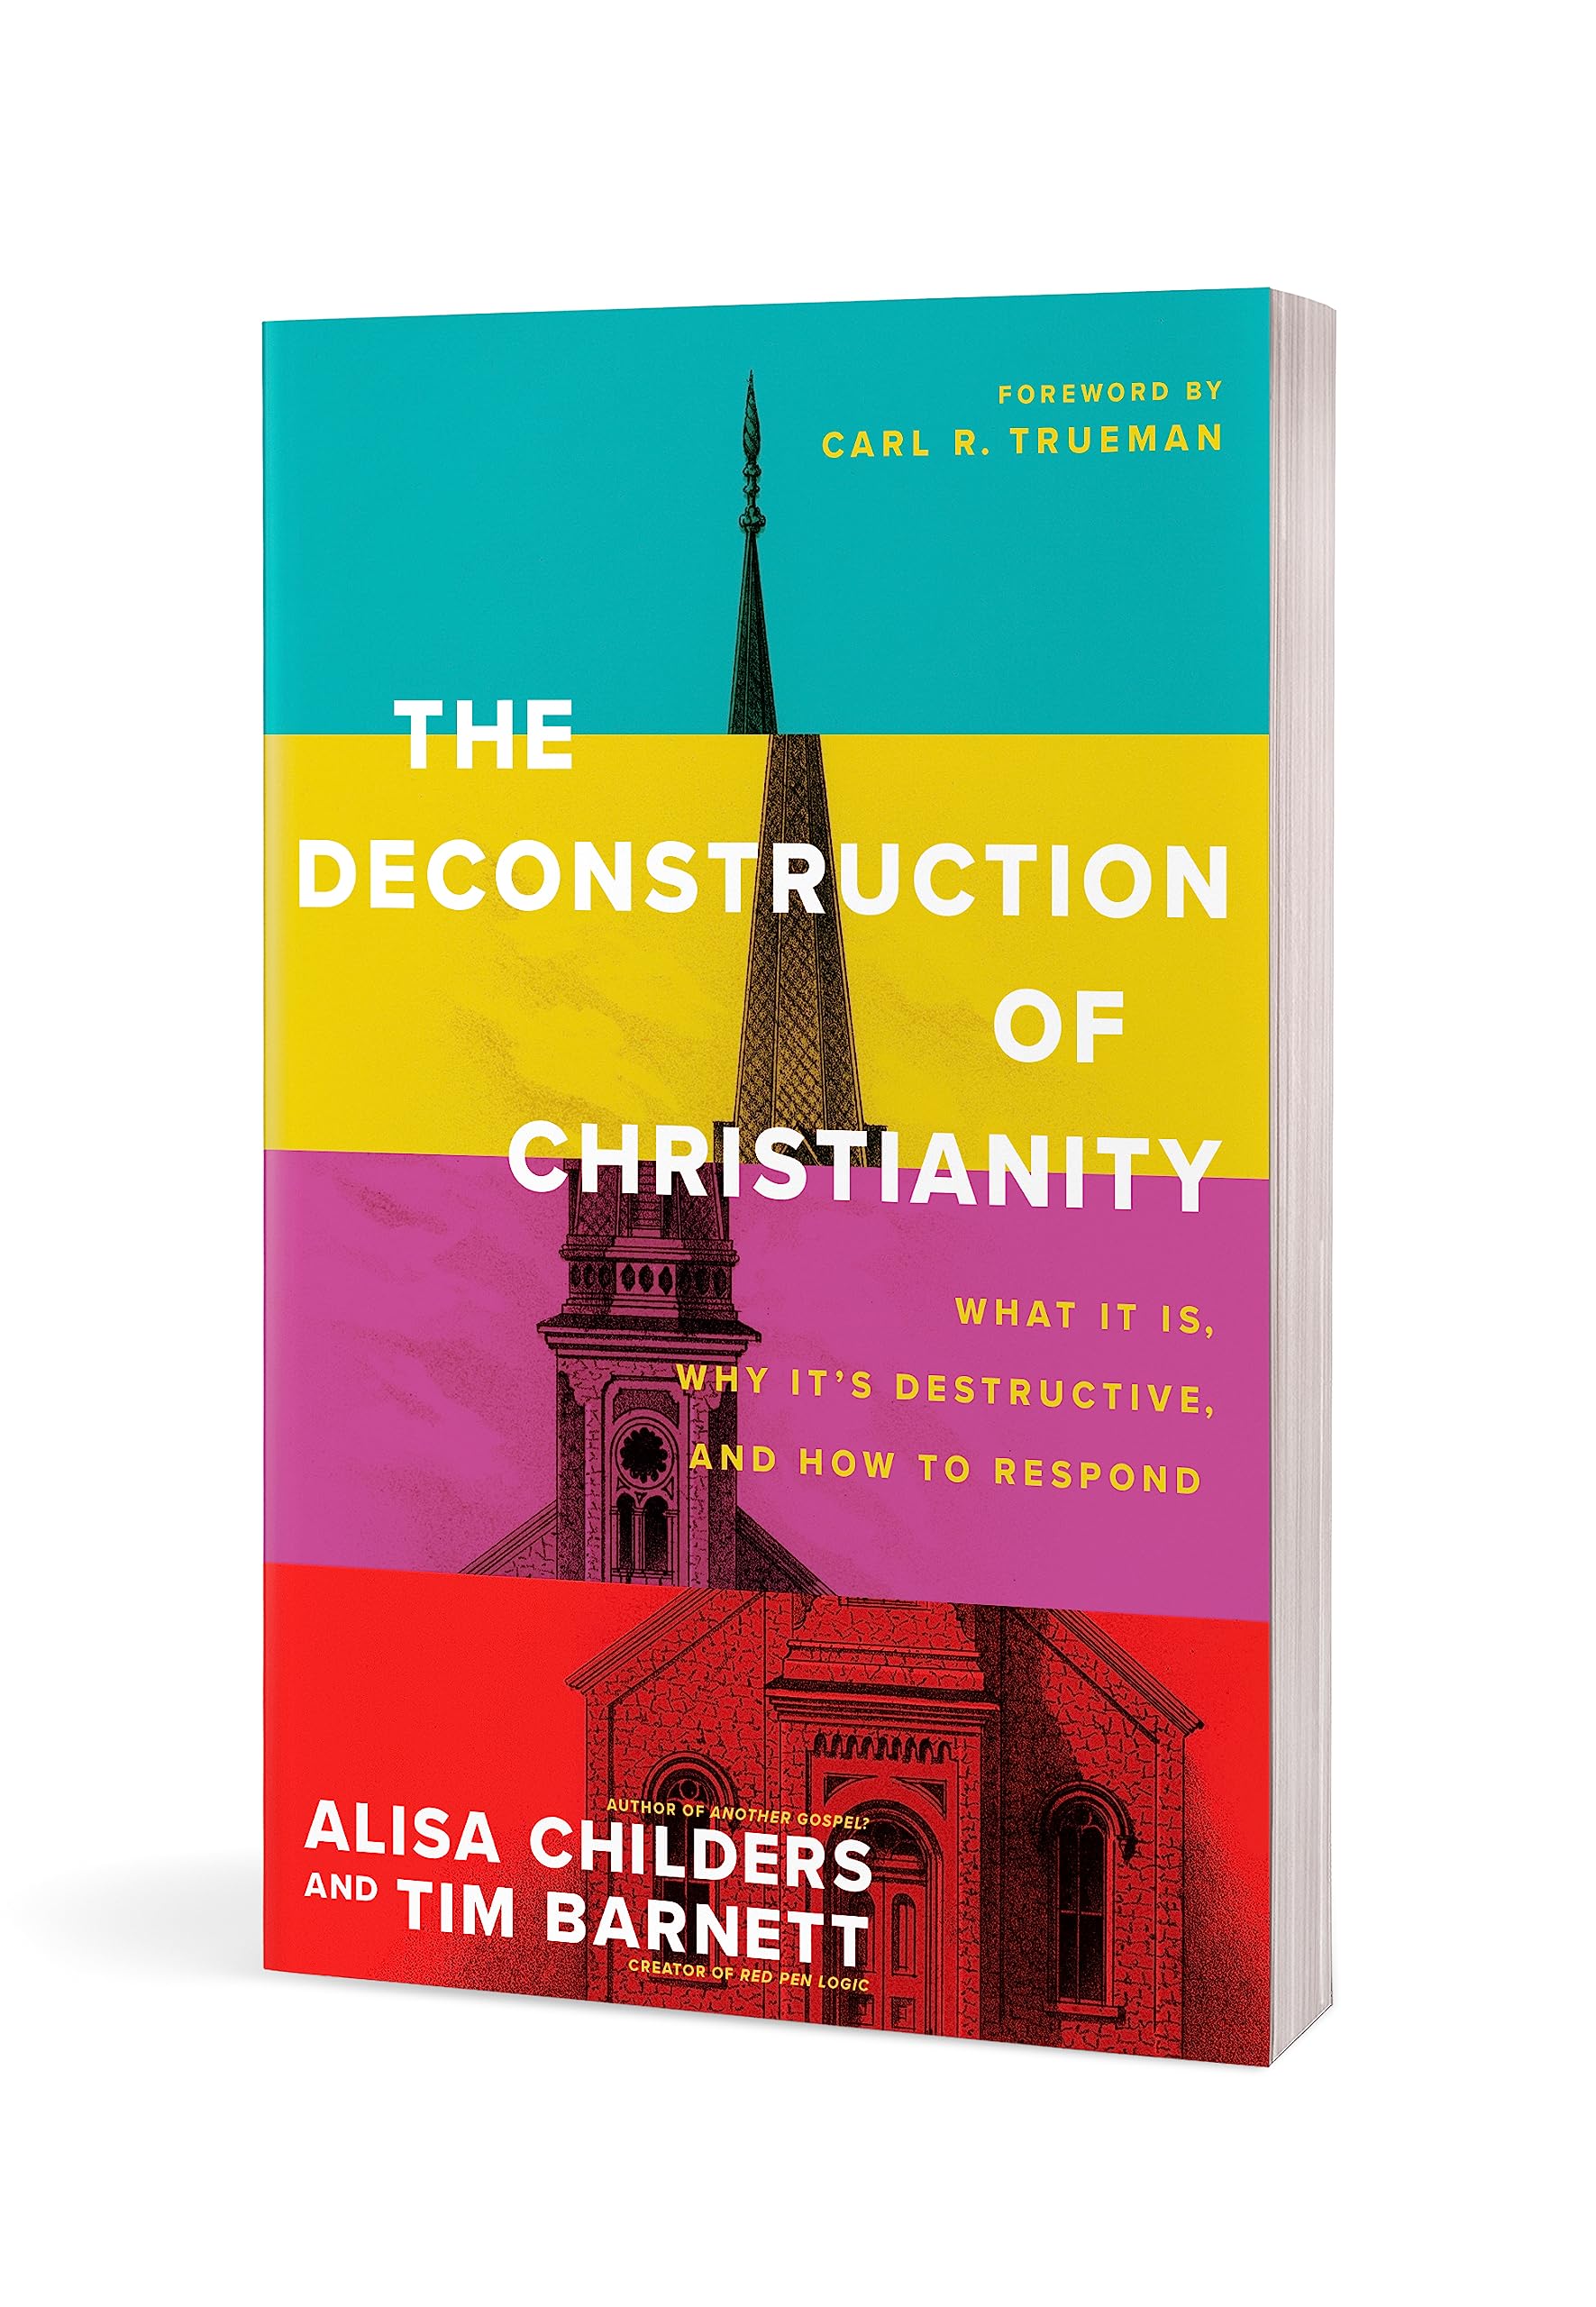 The Deconstruction of Christianity: What It Is, Why It’s Destructive, and How to Respond